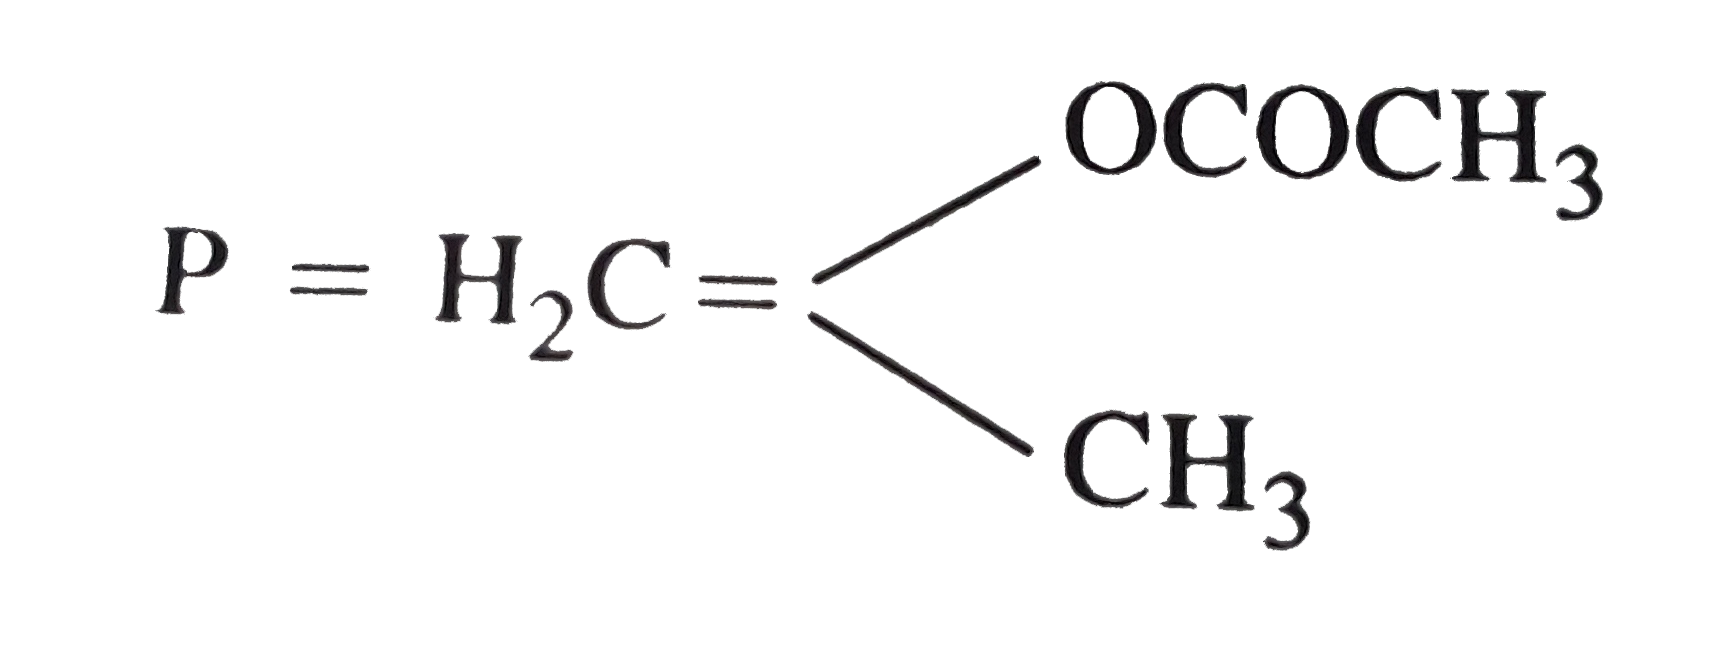 The product of acid hydrolysis of P and Q can be distinguished by